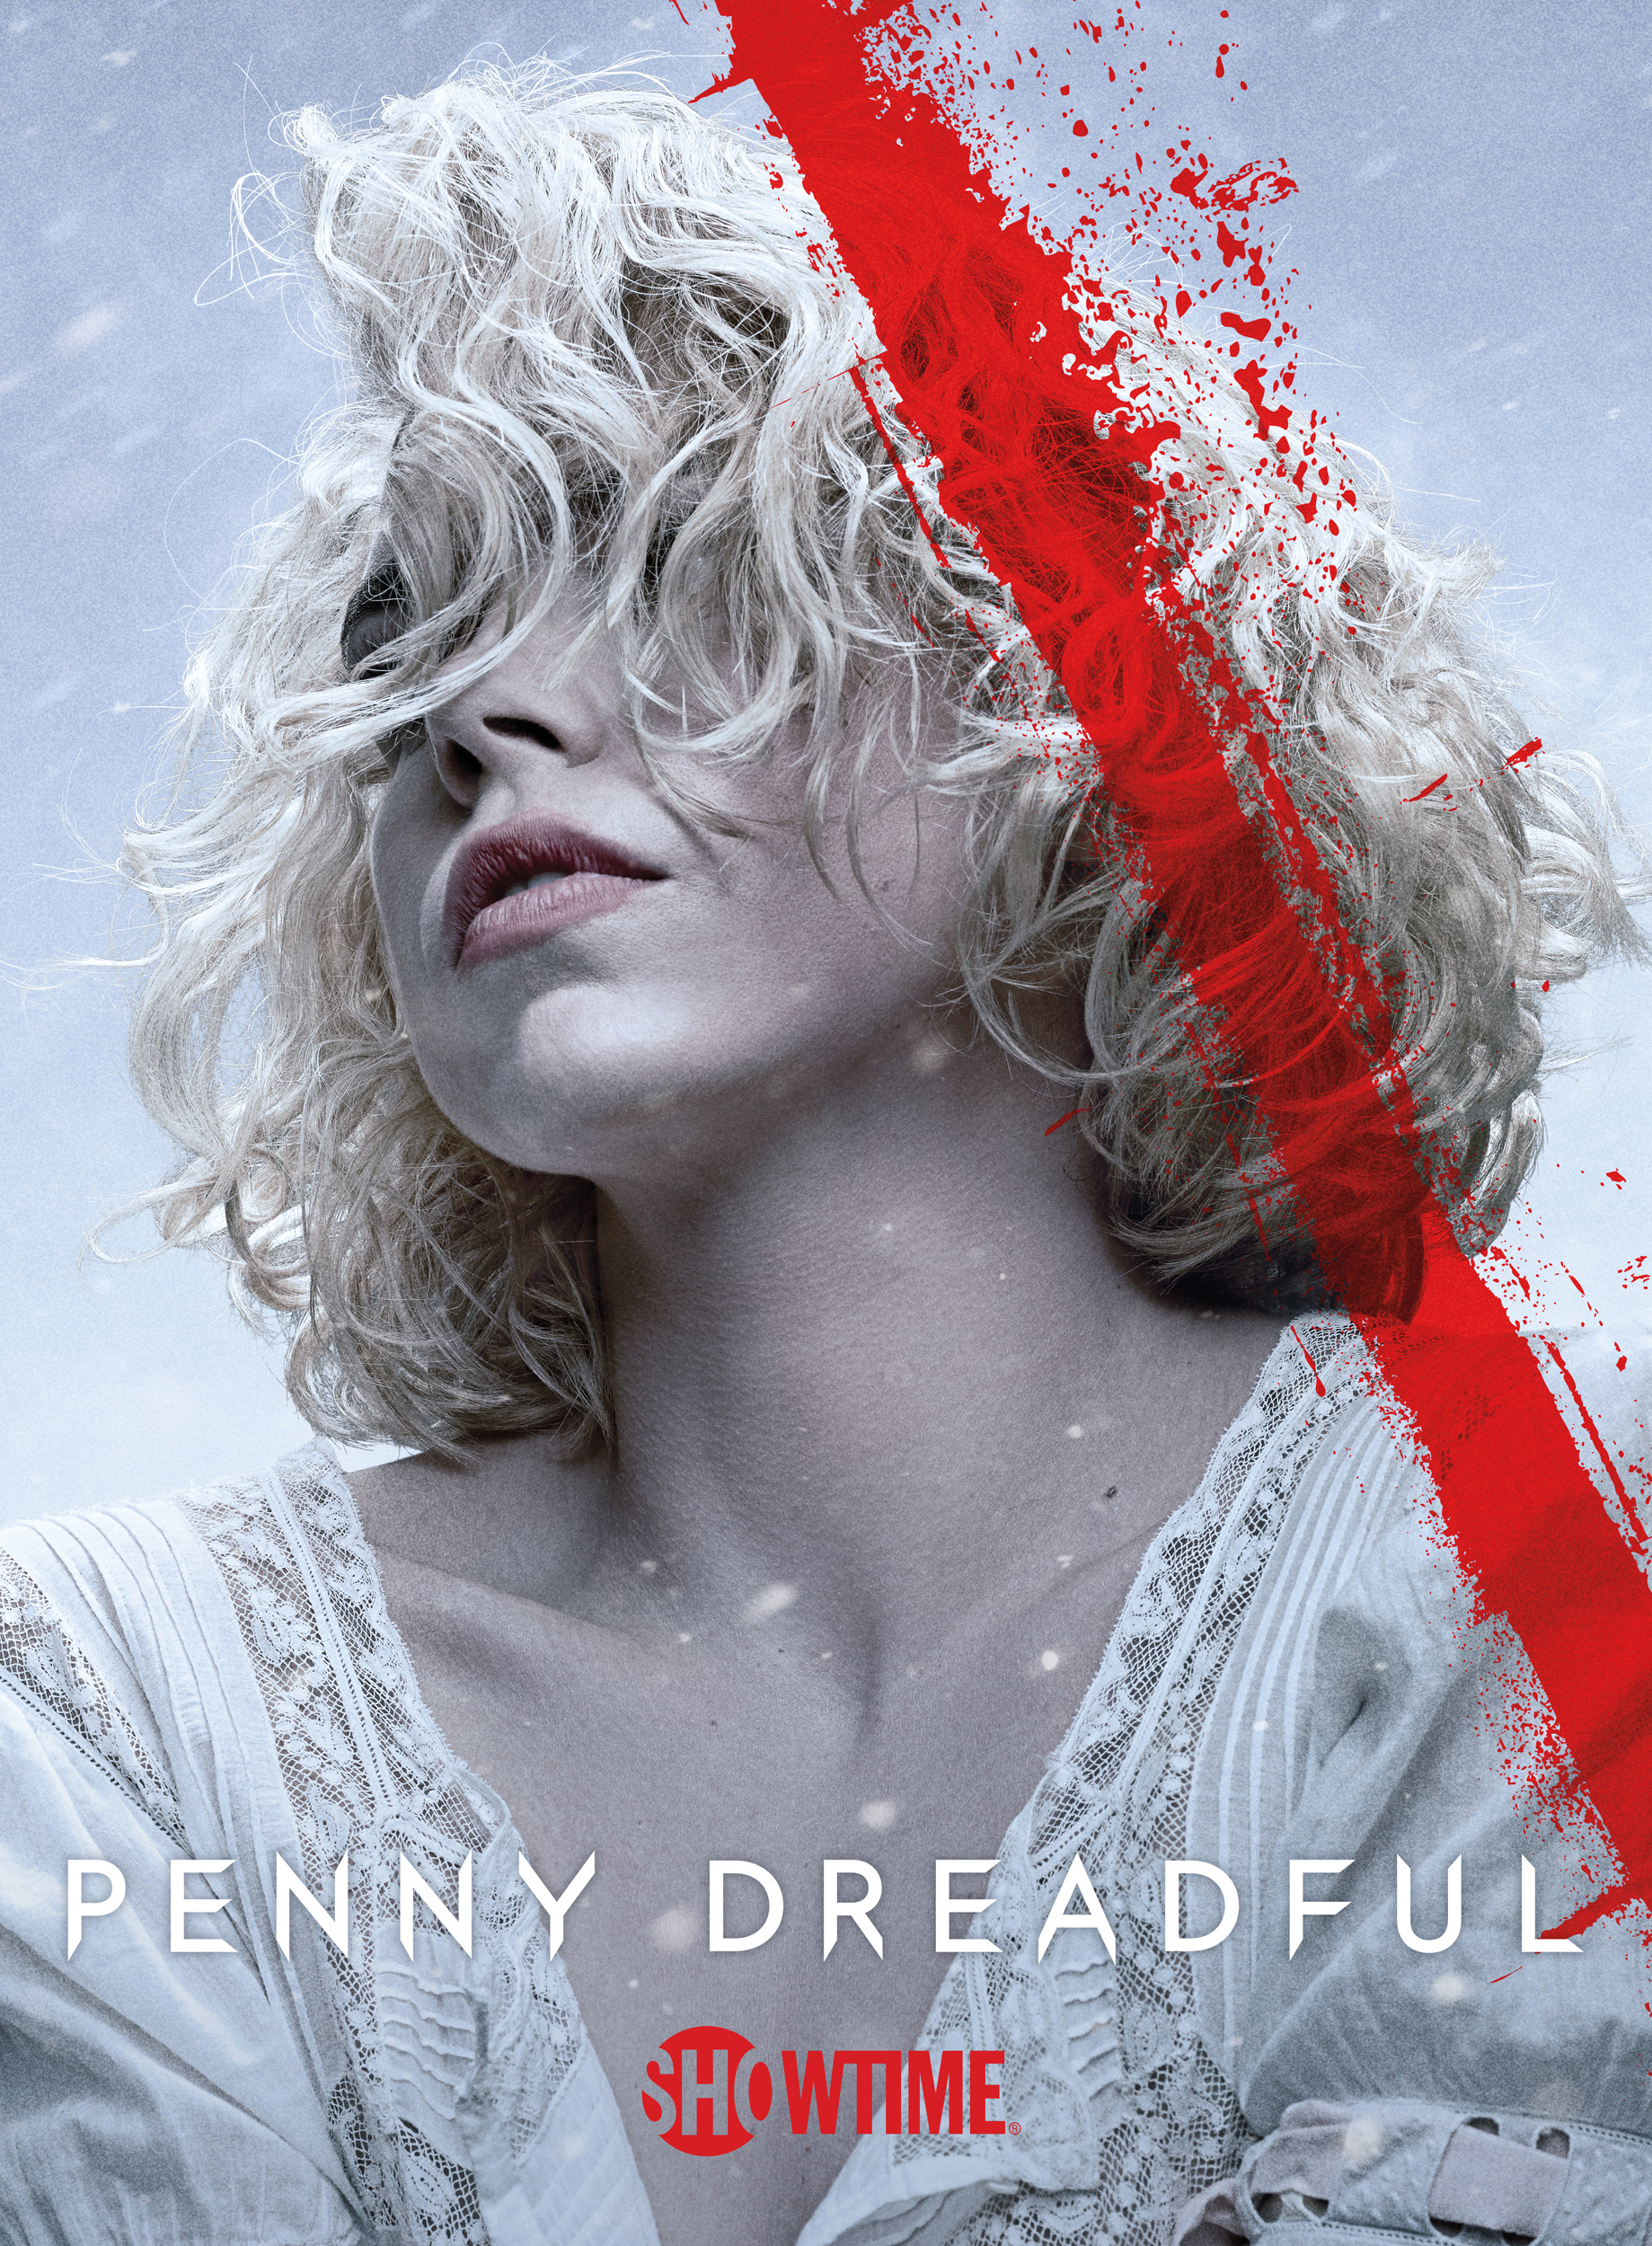 Mega Sized Movie Poster Image for Penny Dreadful (#21 of 21)